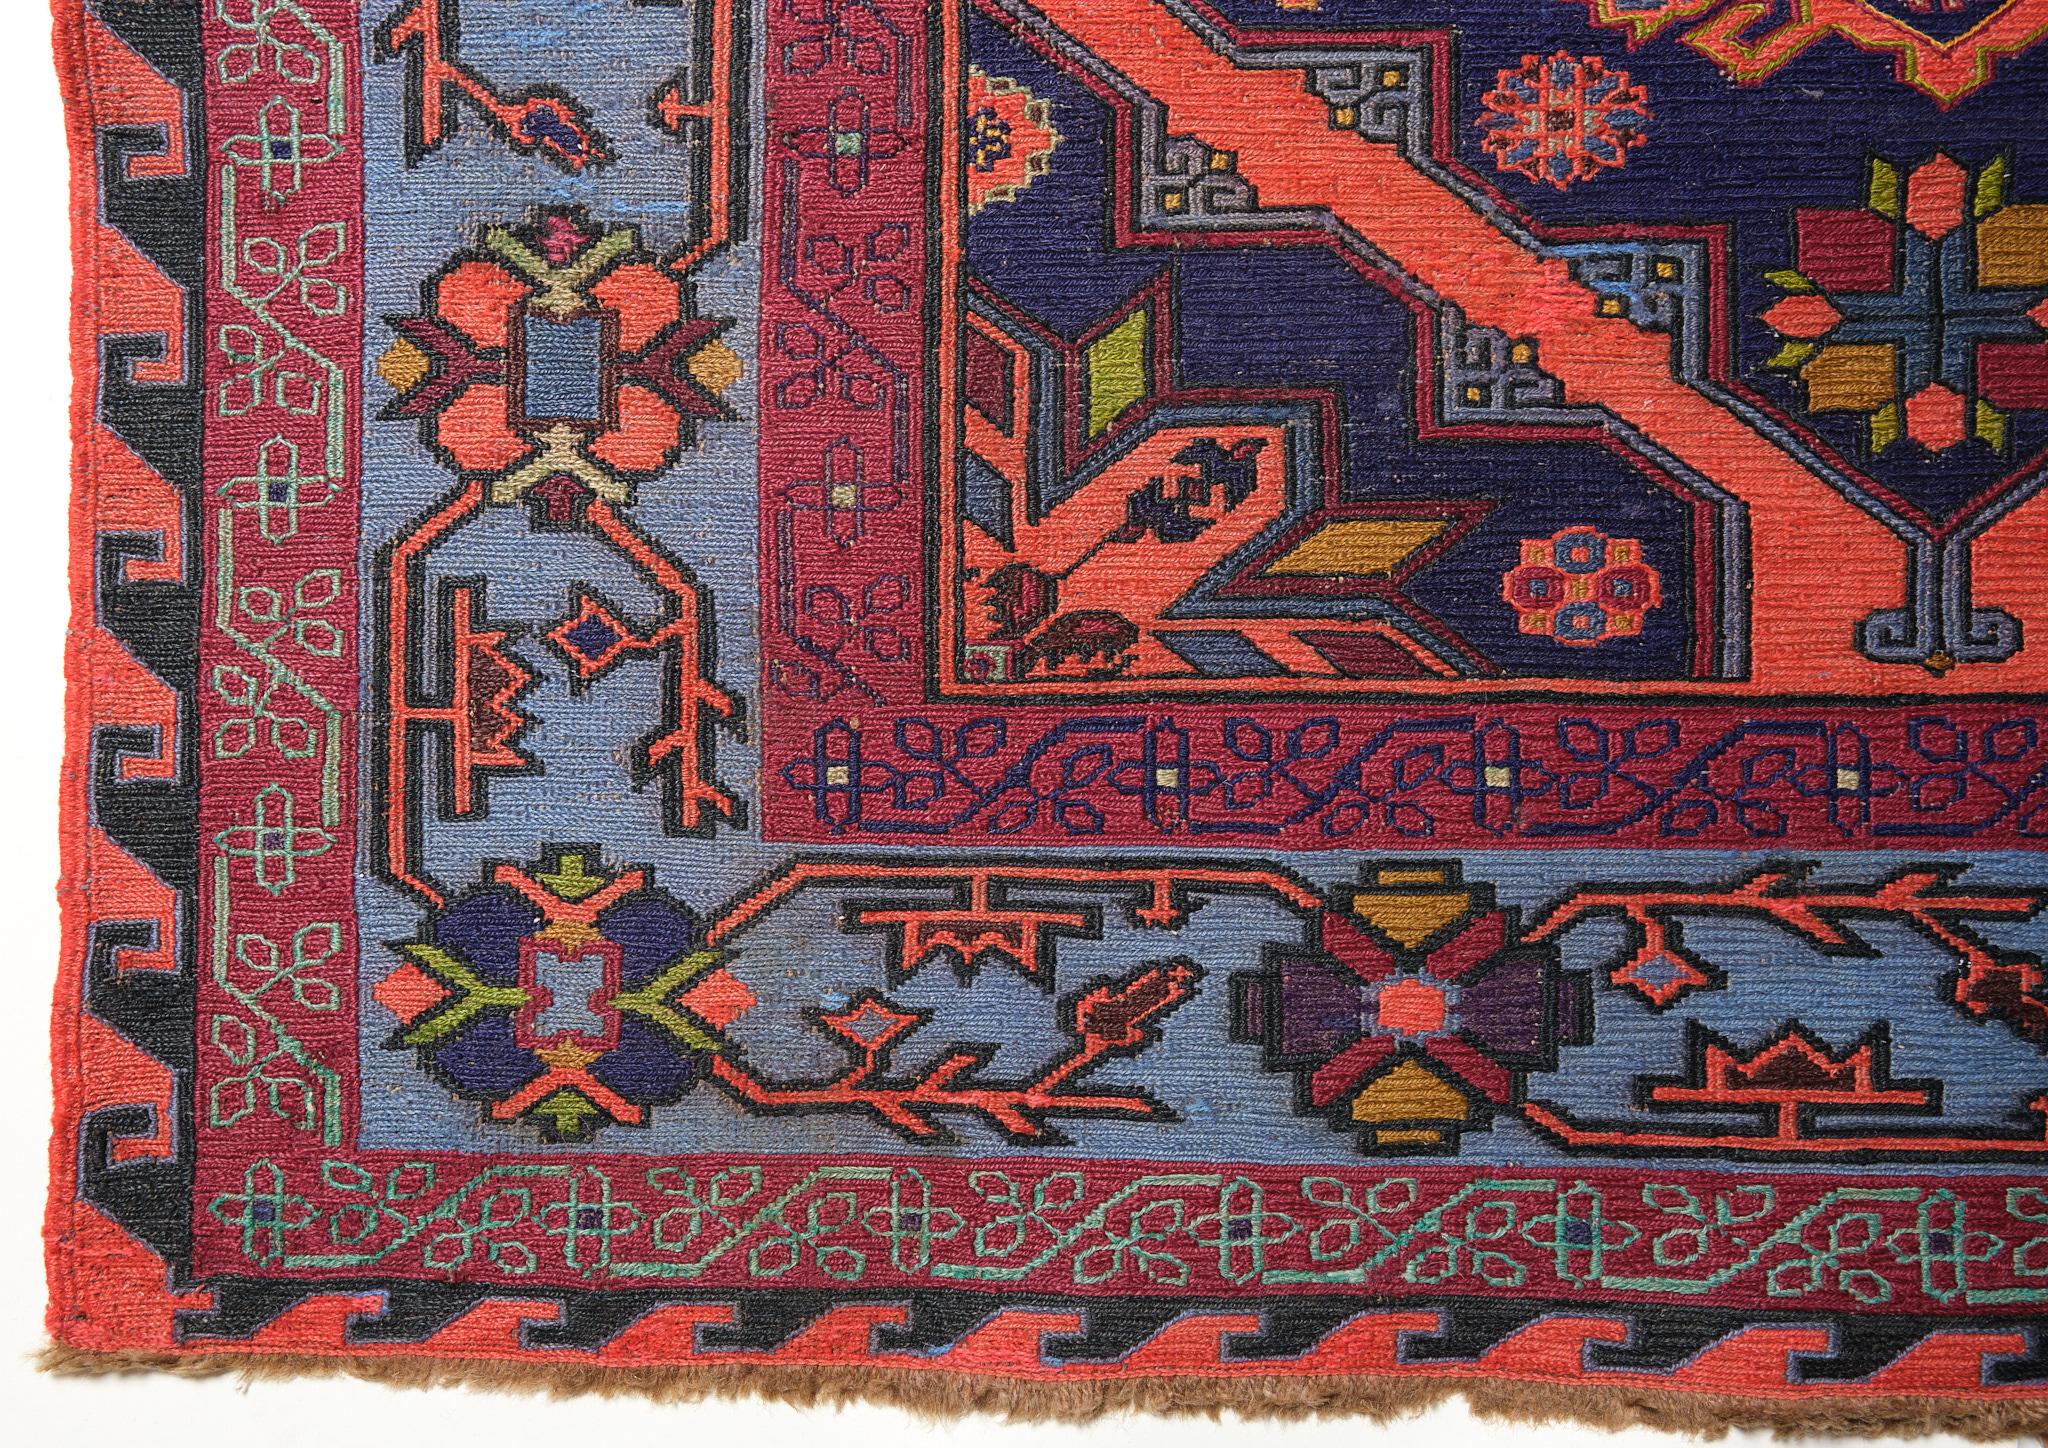 This is an old Soumak ( Sumak, Sumac ) Kilim from the Caucasus region with a rare and beautiful color composition.

Of the four countries that make up the Caucasus, Azerbaijan produces the most kilims, and the land has a long history of weaving.